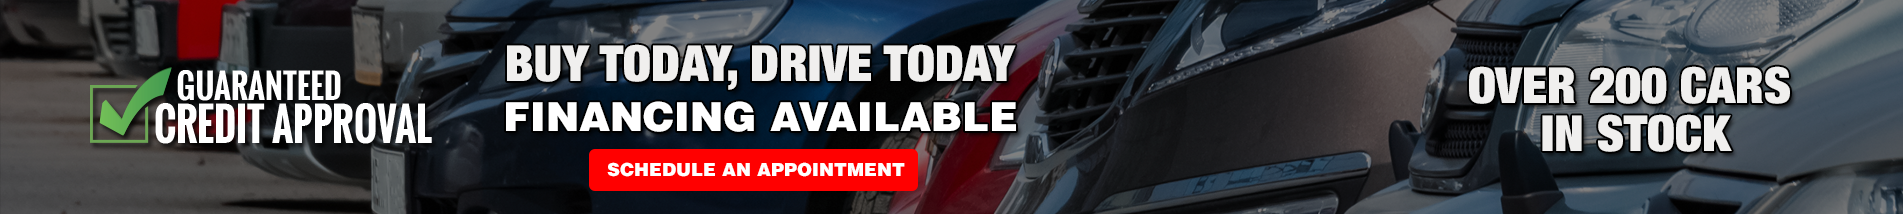 Schedule an appointment at Route 4 Auto Exchange